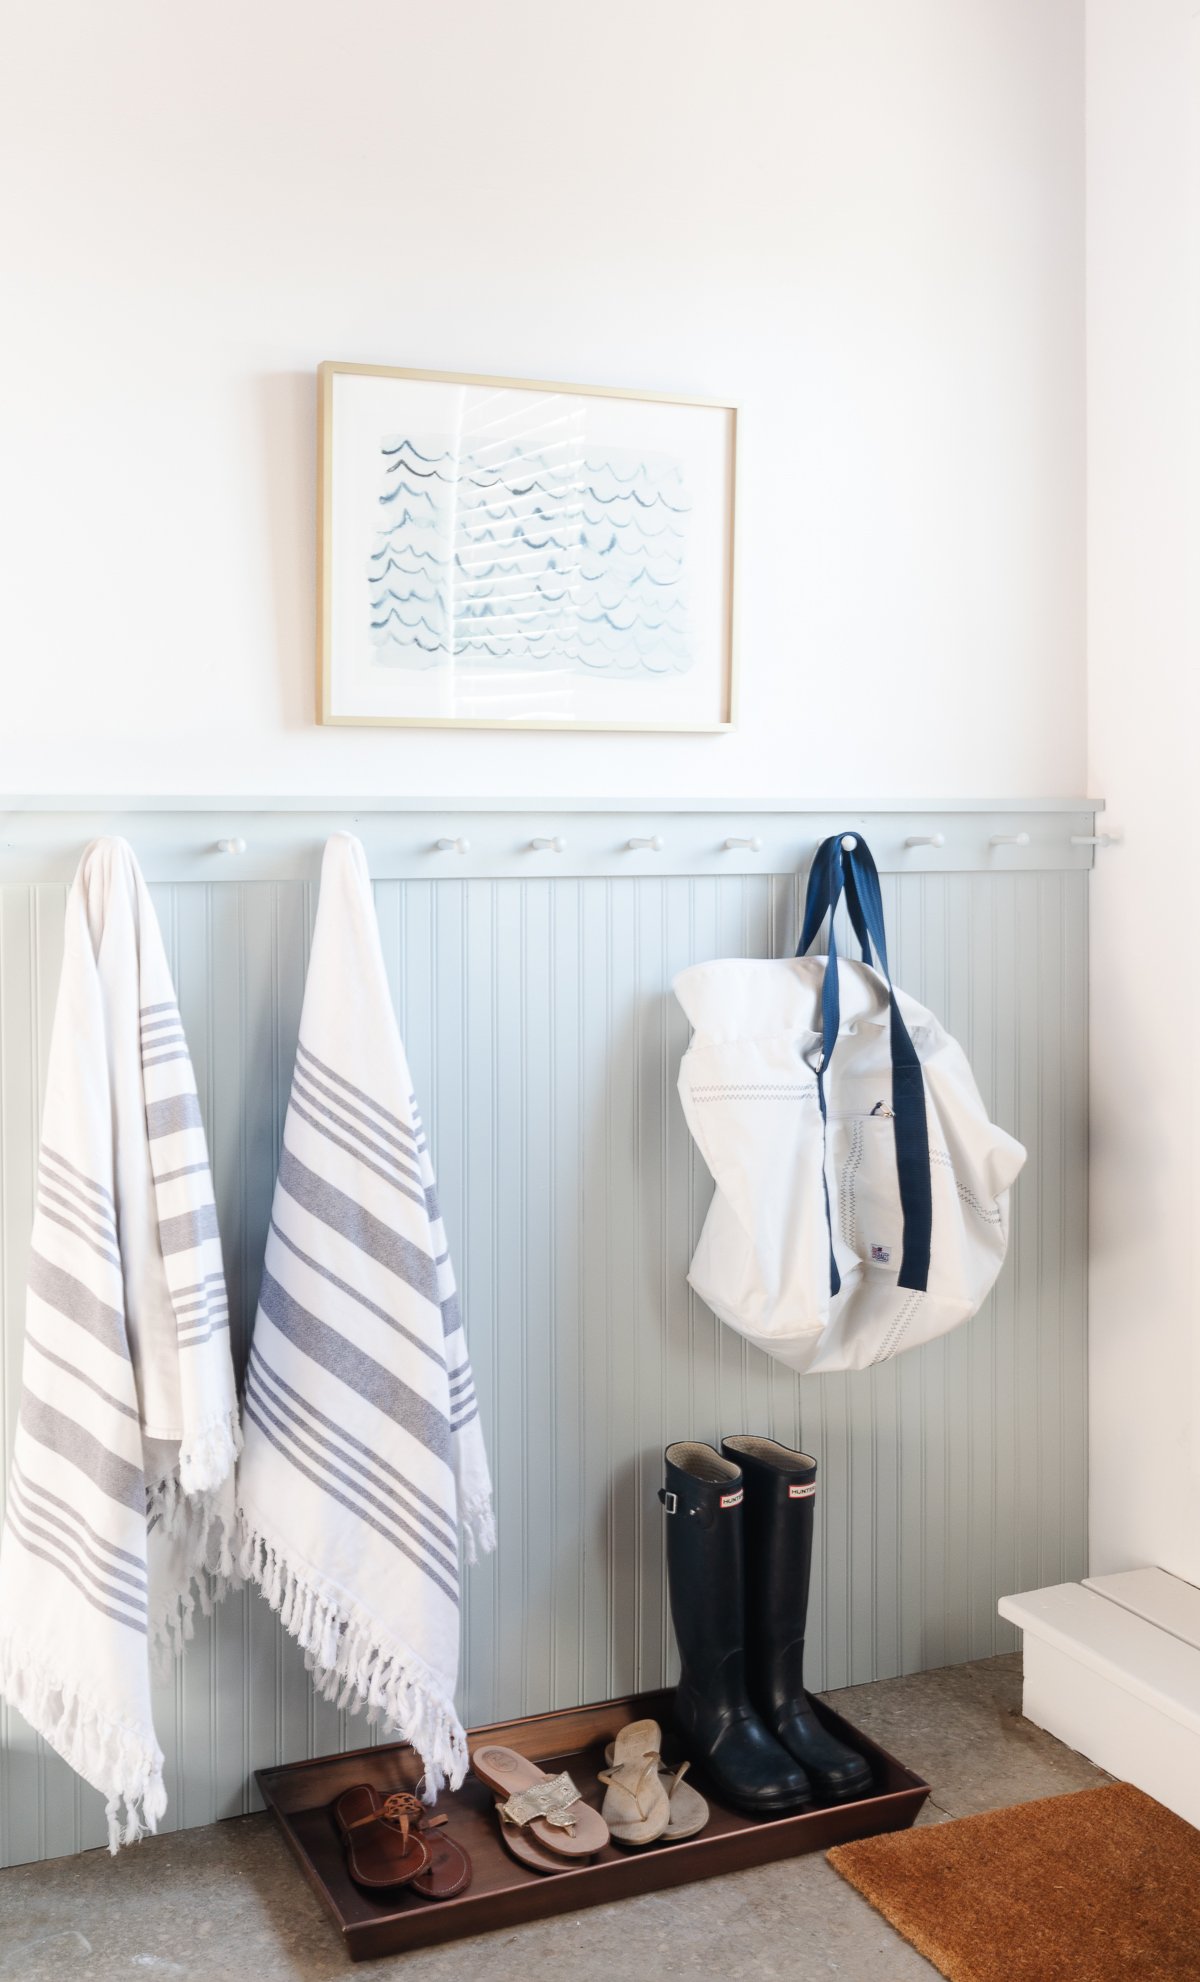 towels and bags on peg rail